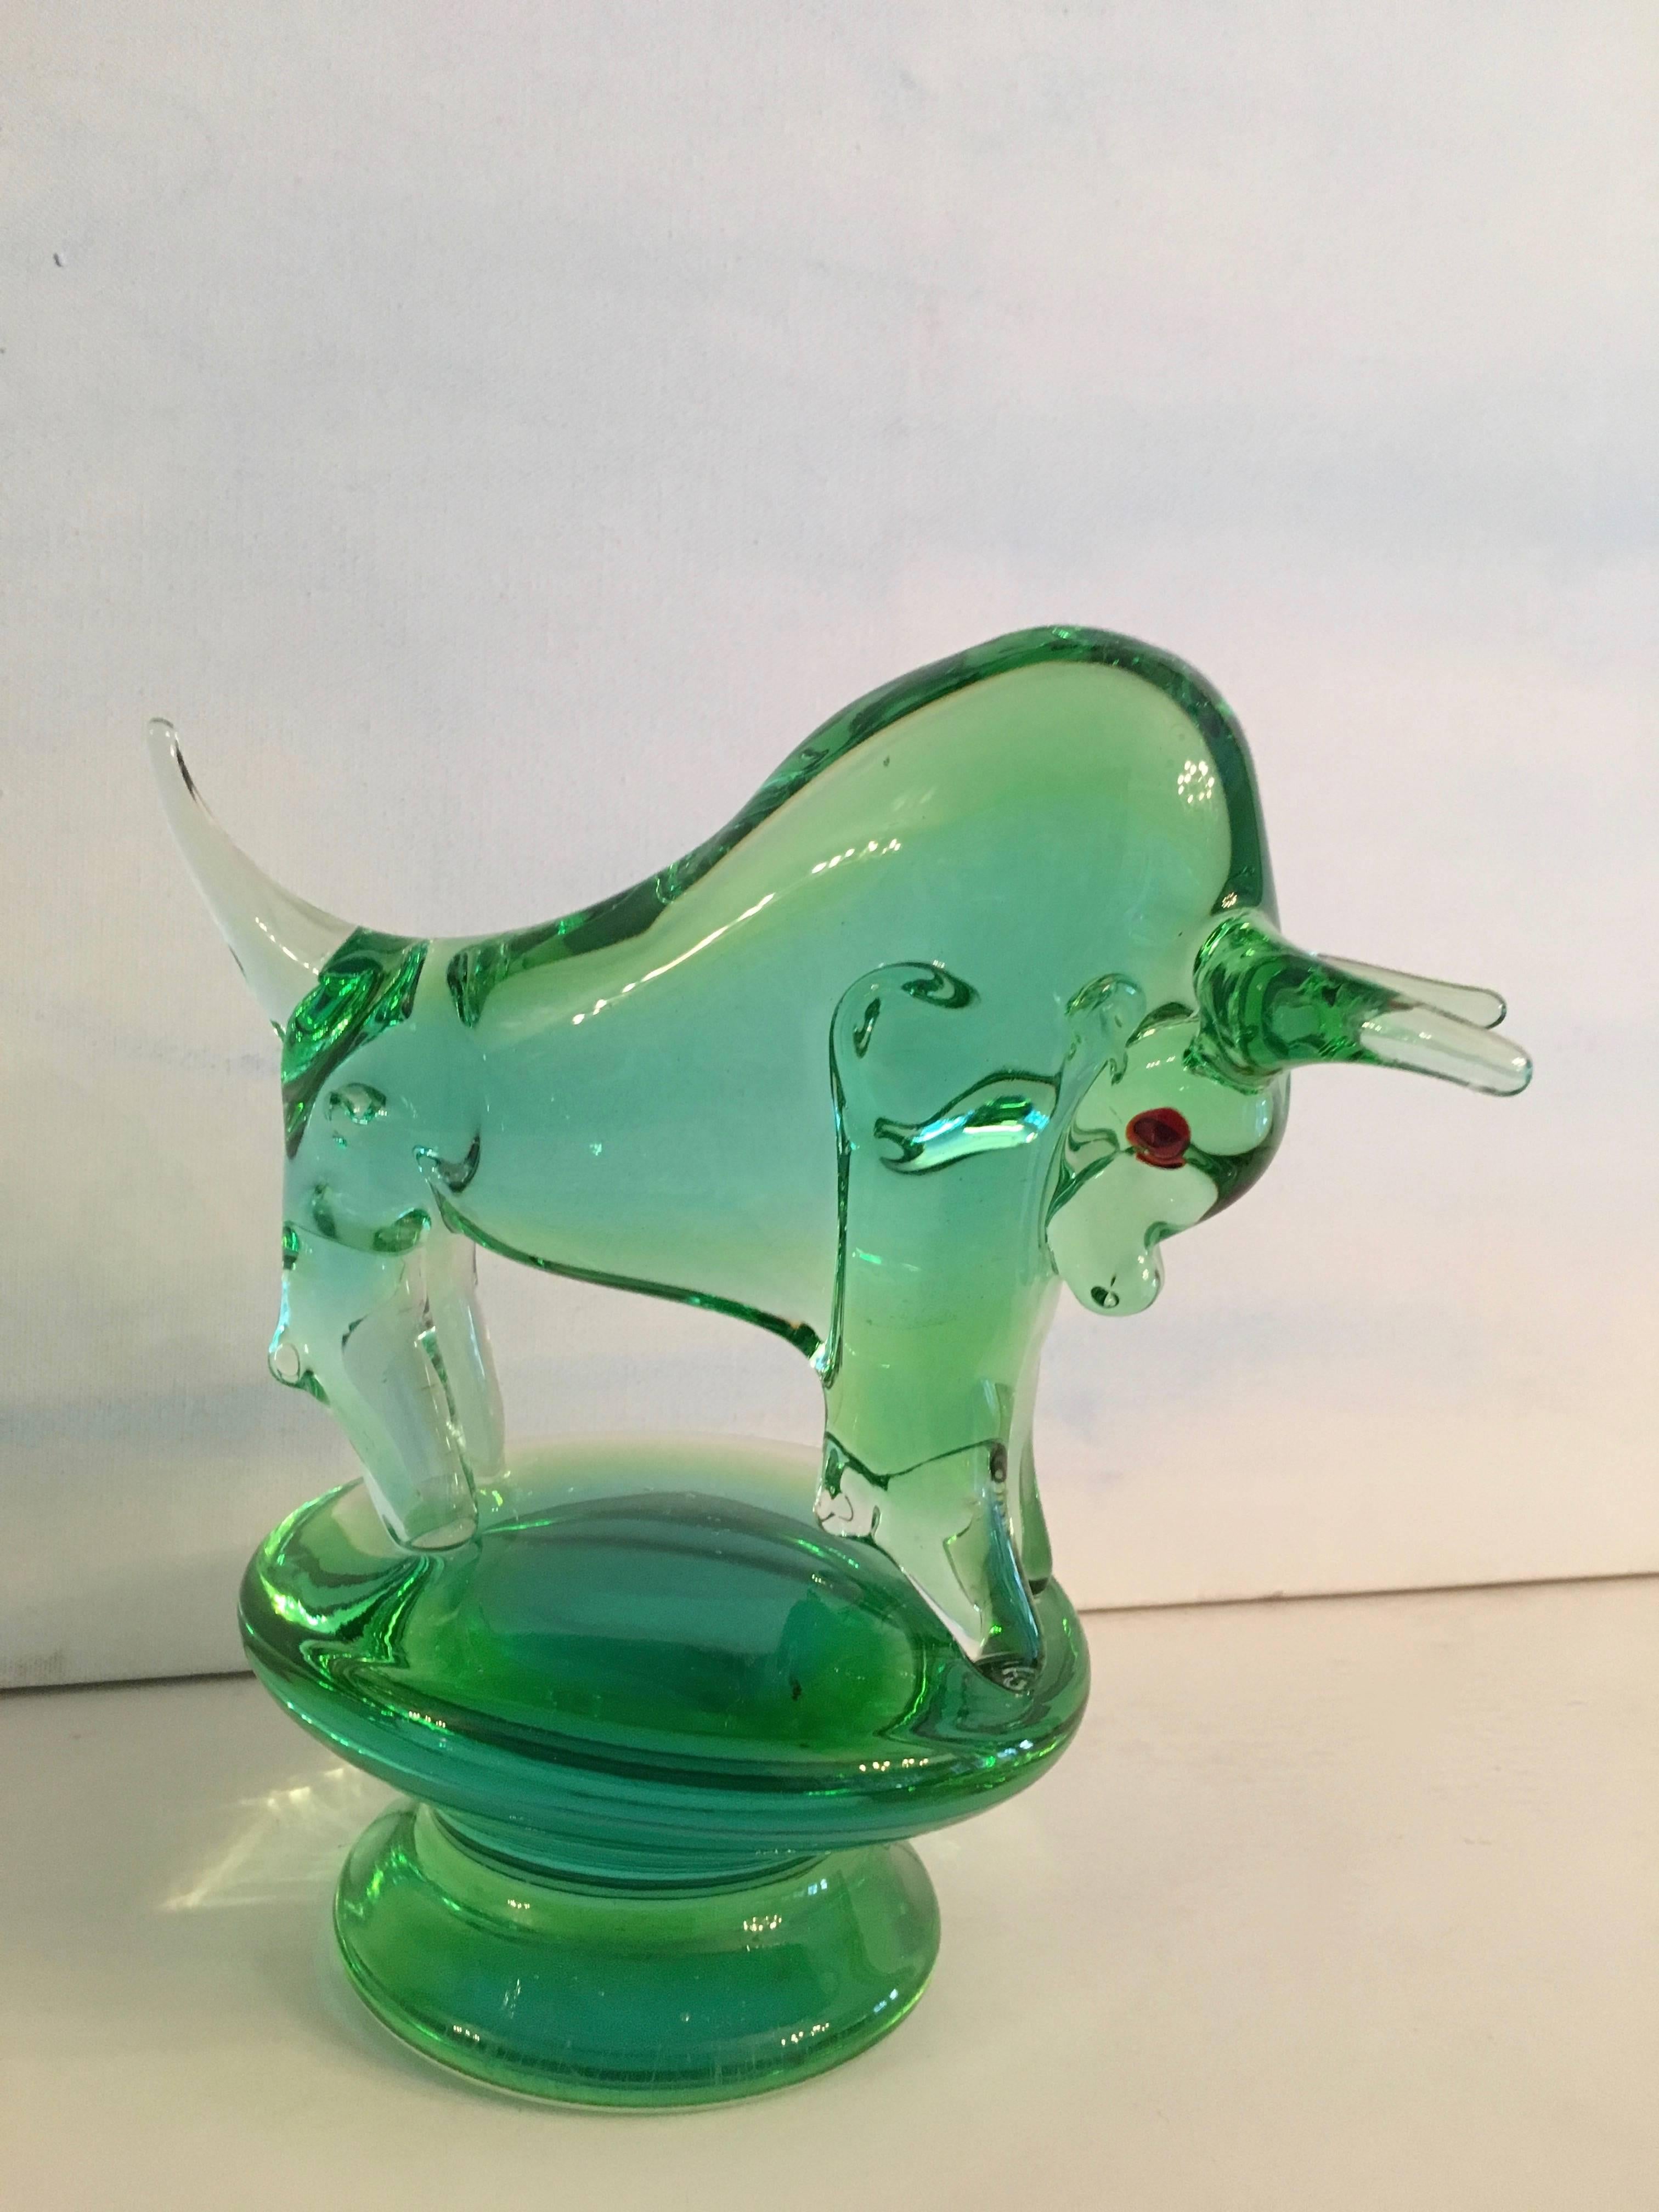 An exceptional and unique Italian Murano bull of green glass, red glass eyes detail the face, this bull is substantial and situated on a large block glass stand, wonderful for any room on any shelf, guaranteed to make a statement and be a